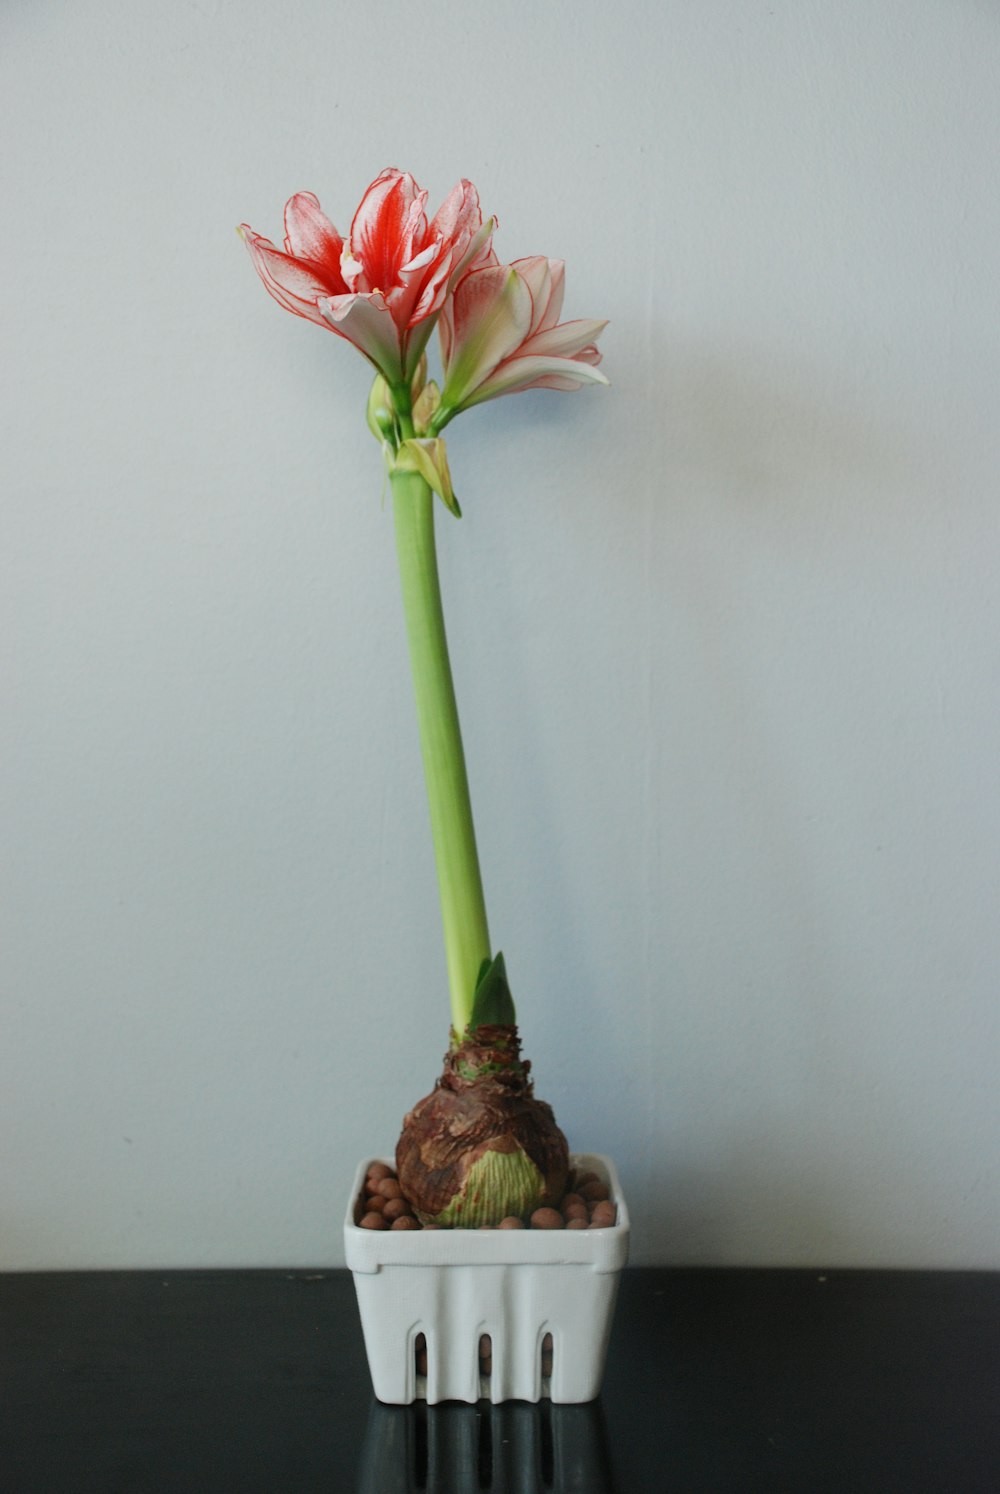 red and white flower on brown wooden table